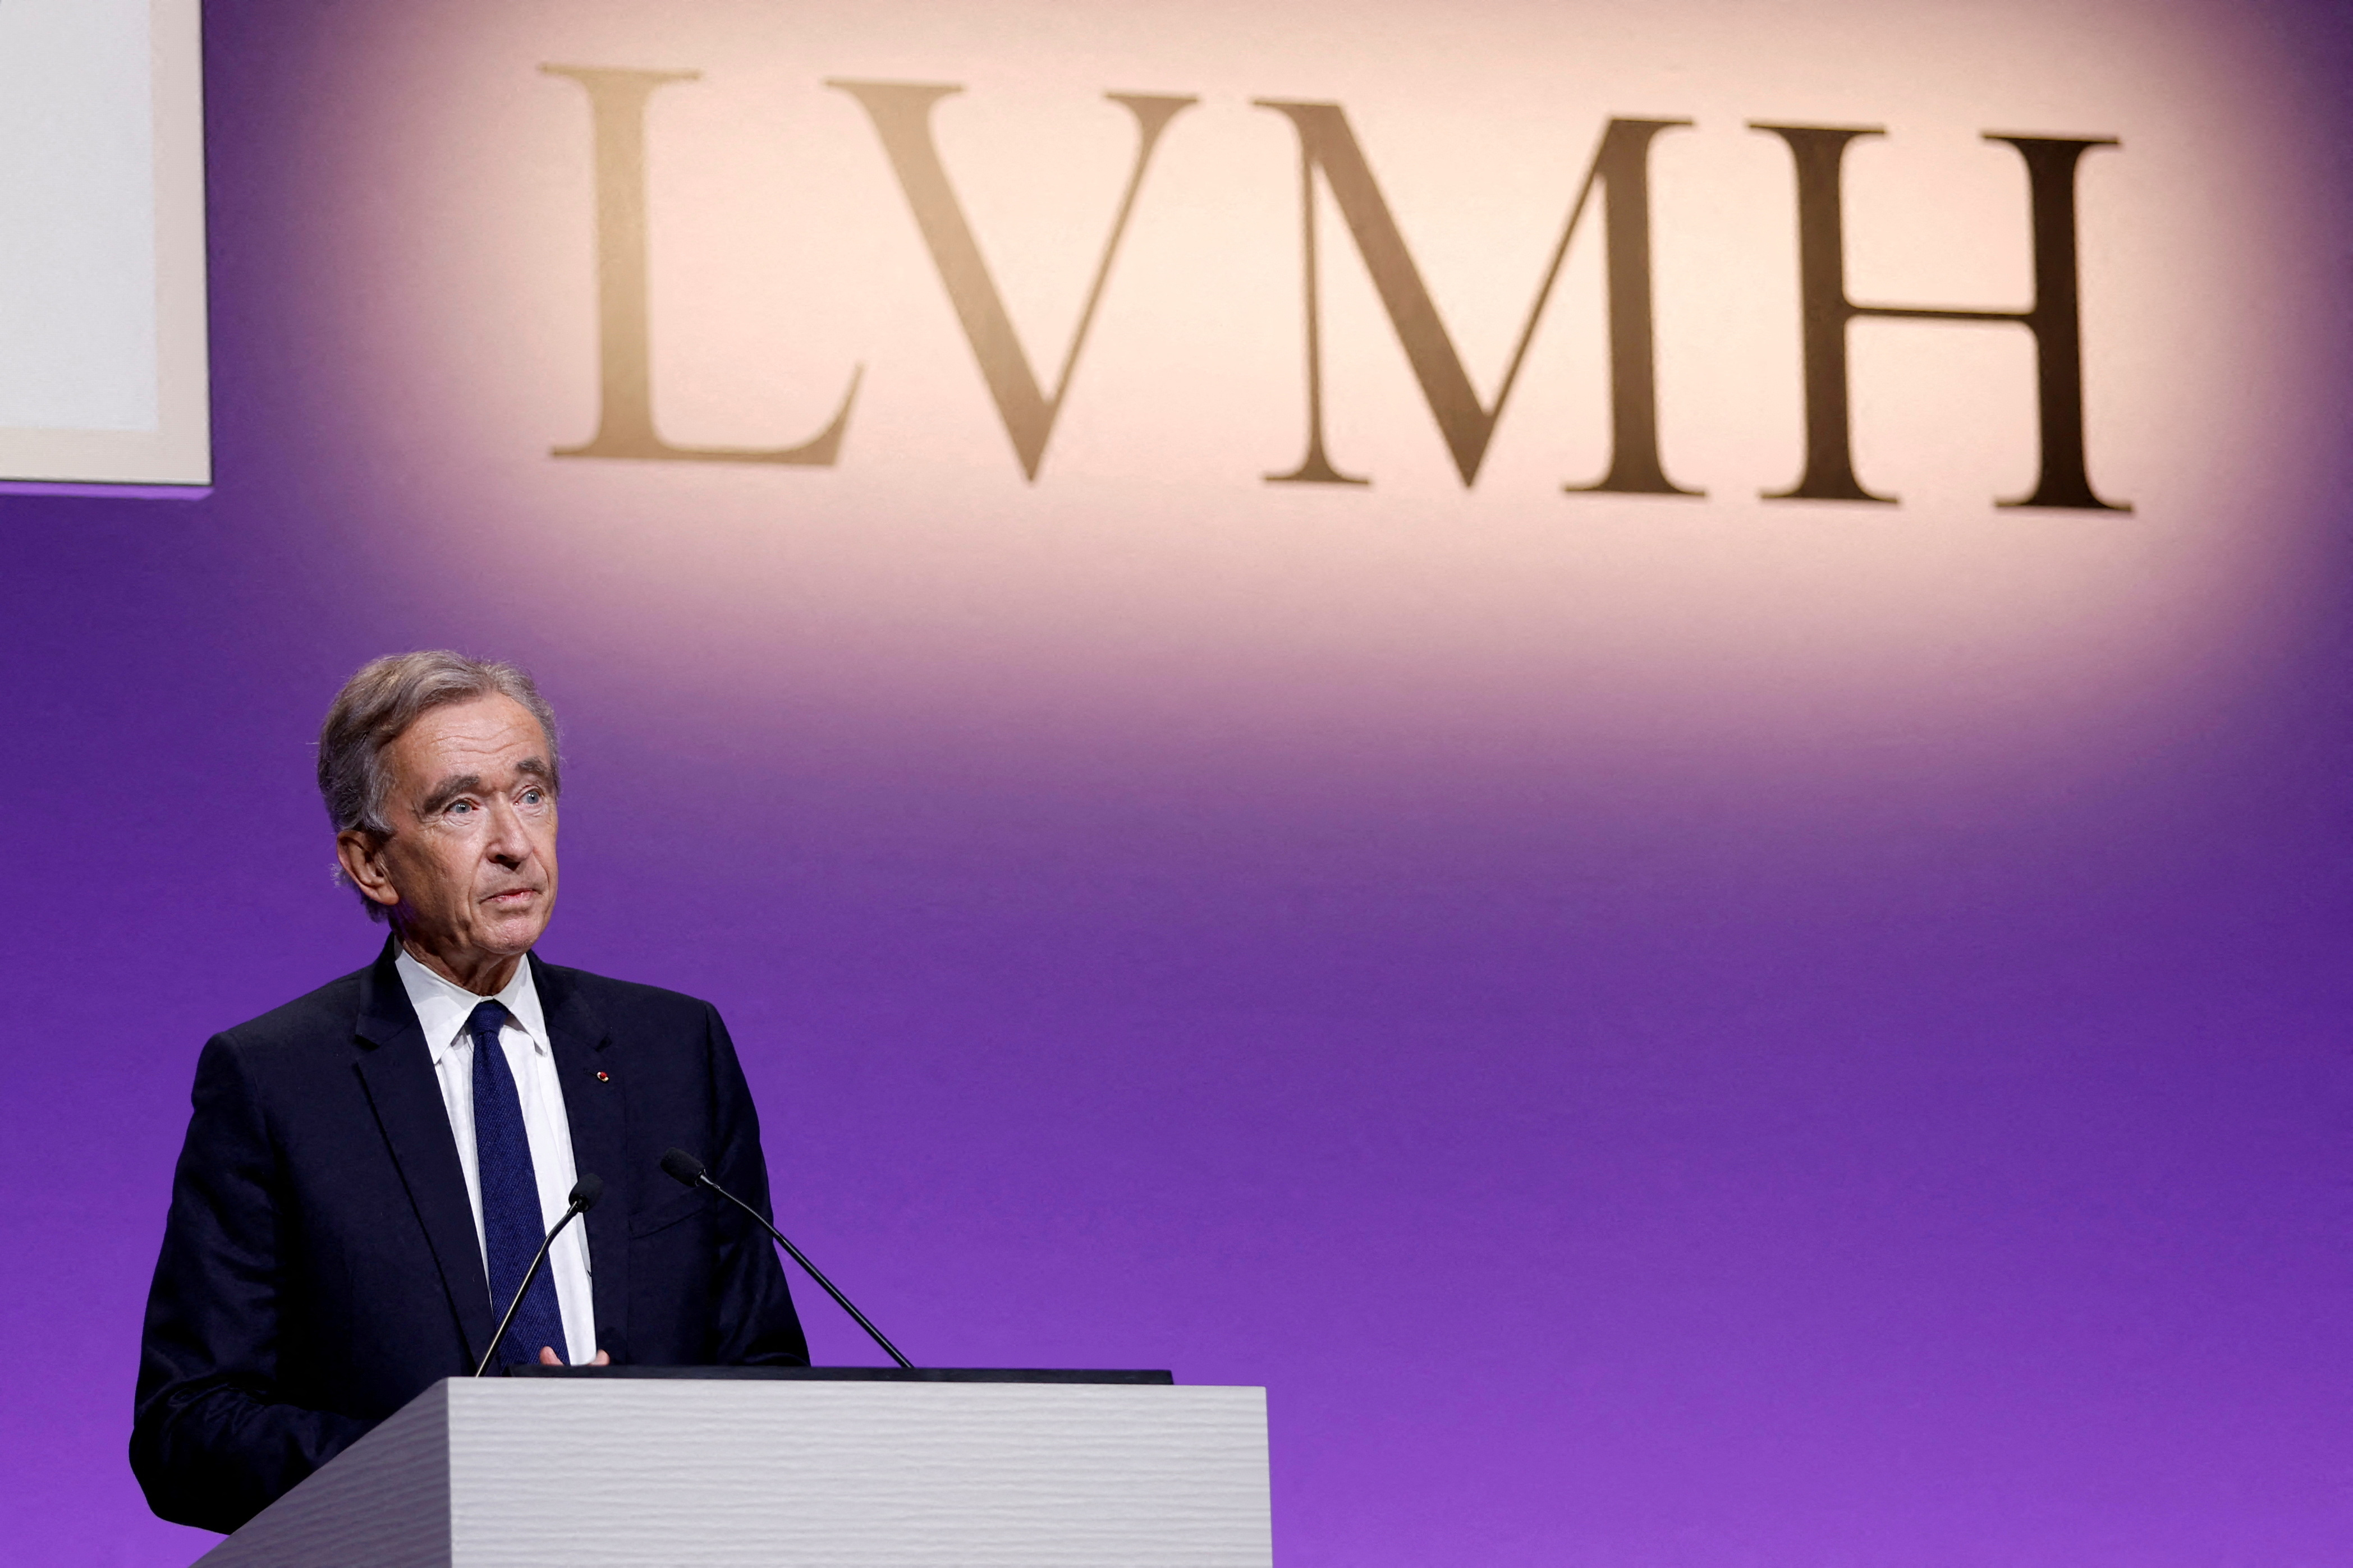 Bernard Arnault, Chairman and CEO of LVMH Moet Hennessy Louis Vuitton, speaks during a news conference